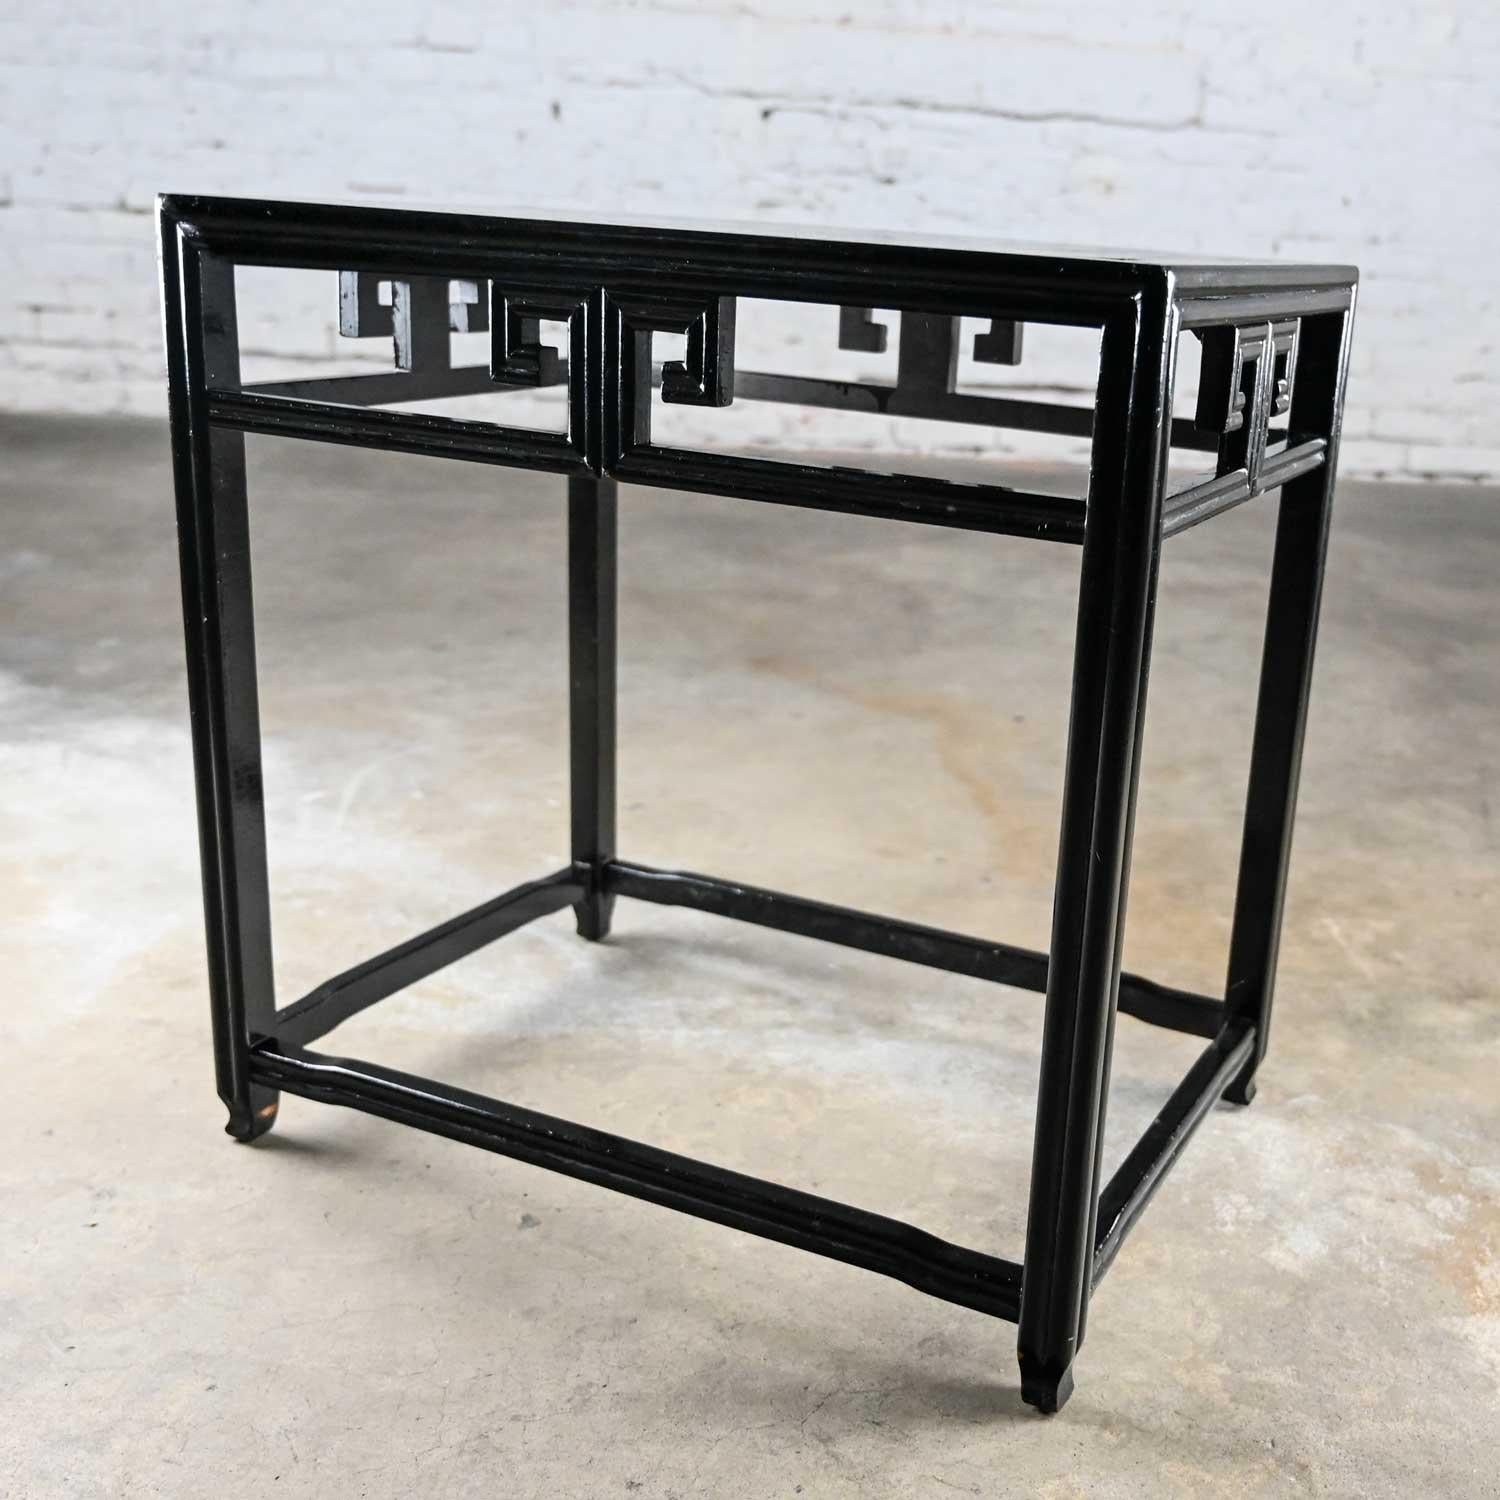 Handsome vintage Chinoiserie rectangular black painted accent or side table by Baker. Beautiful condition, keeping in mind that this is vintage and not new so will have signs of use and wear. It has been touched up but no outstanding flaws found. It